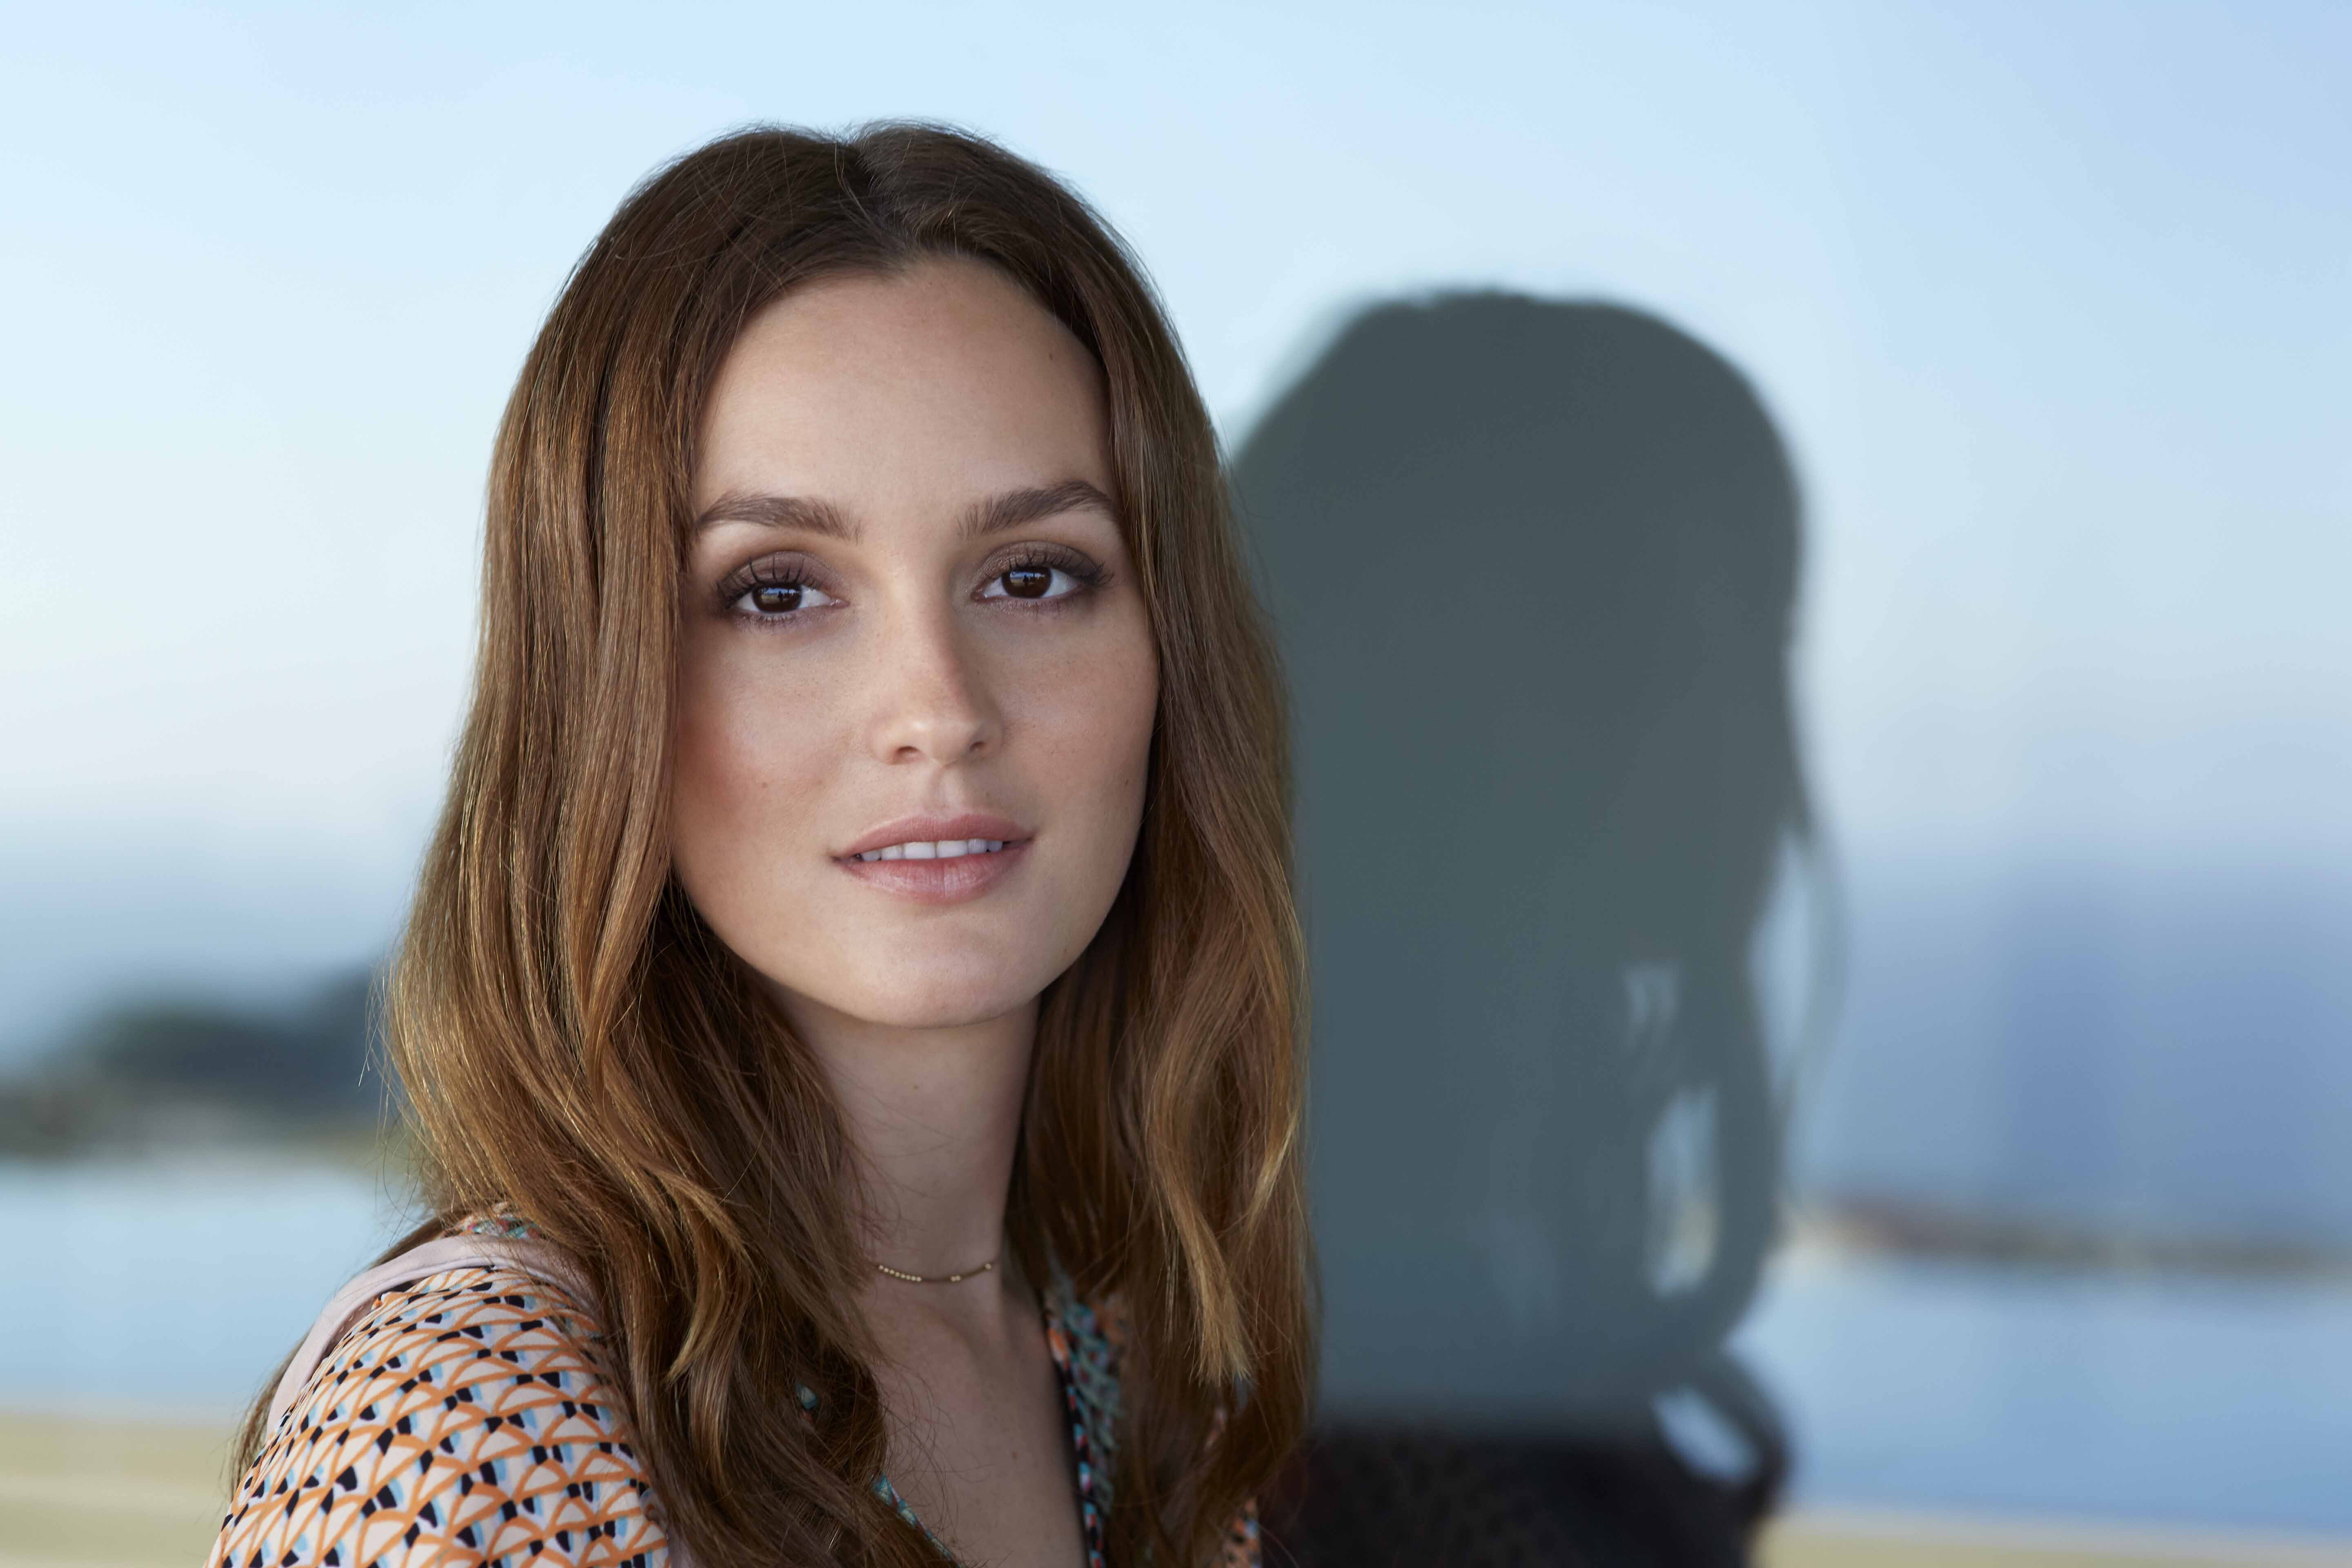 40 Facts About Leighton Meester - Facts.net